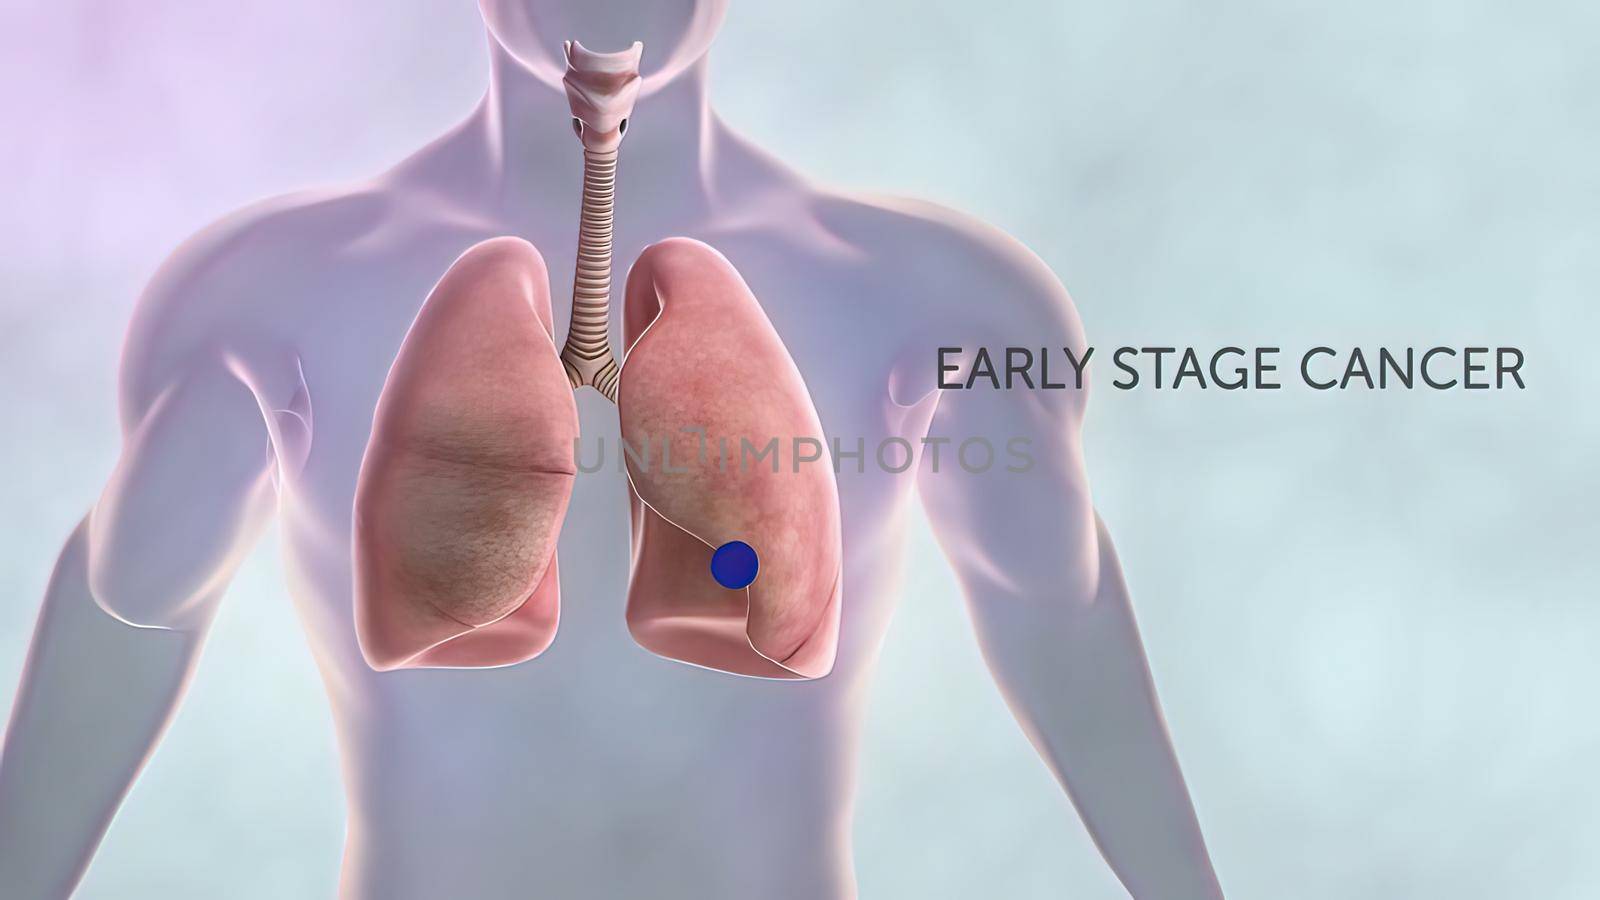 Early stage cancer and advanced stages of cancer. by creativepic